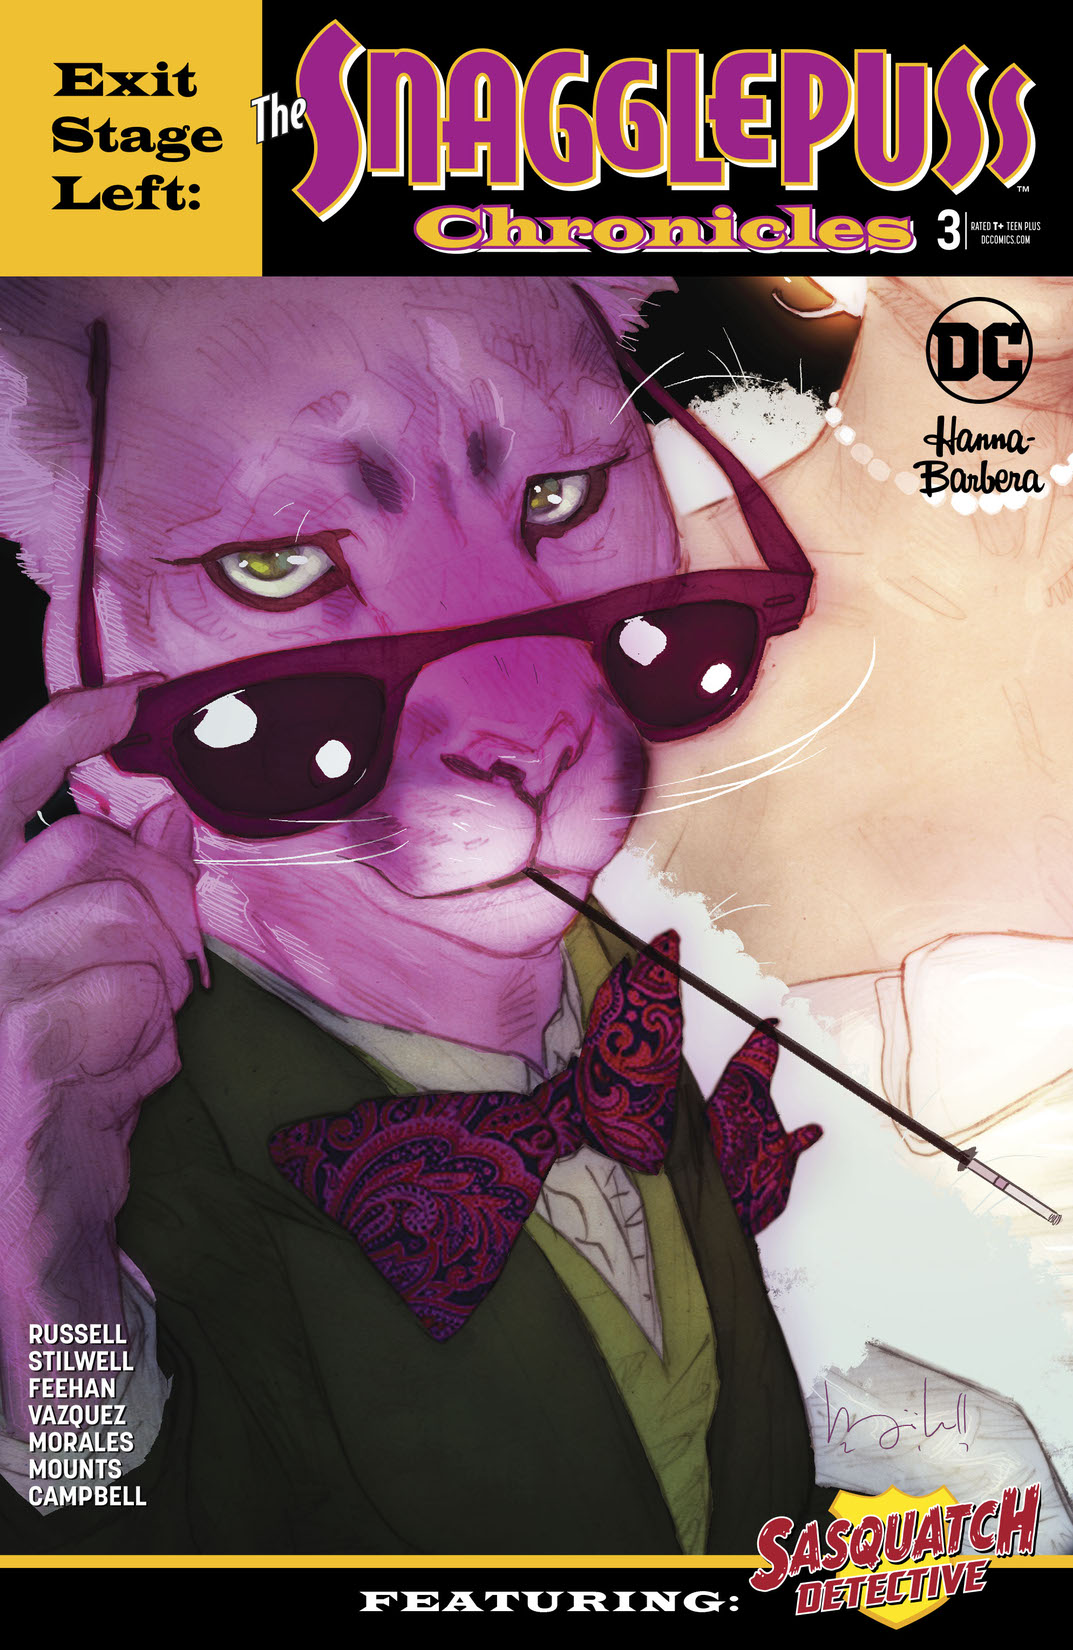 Exit Stage Left: The Snagglepuss Chronicles #3 preview images